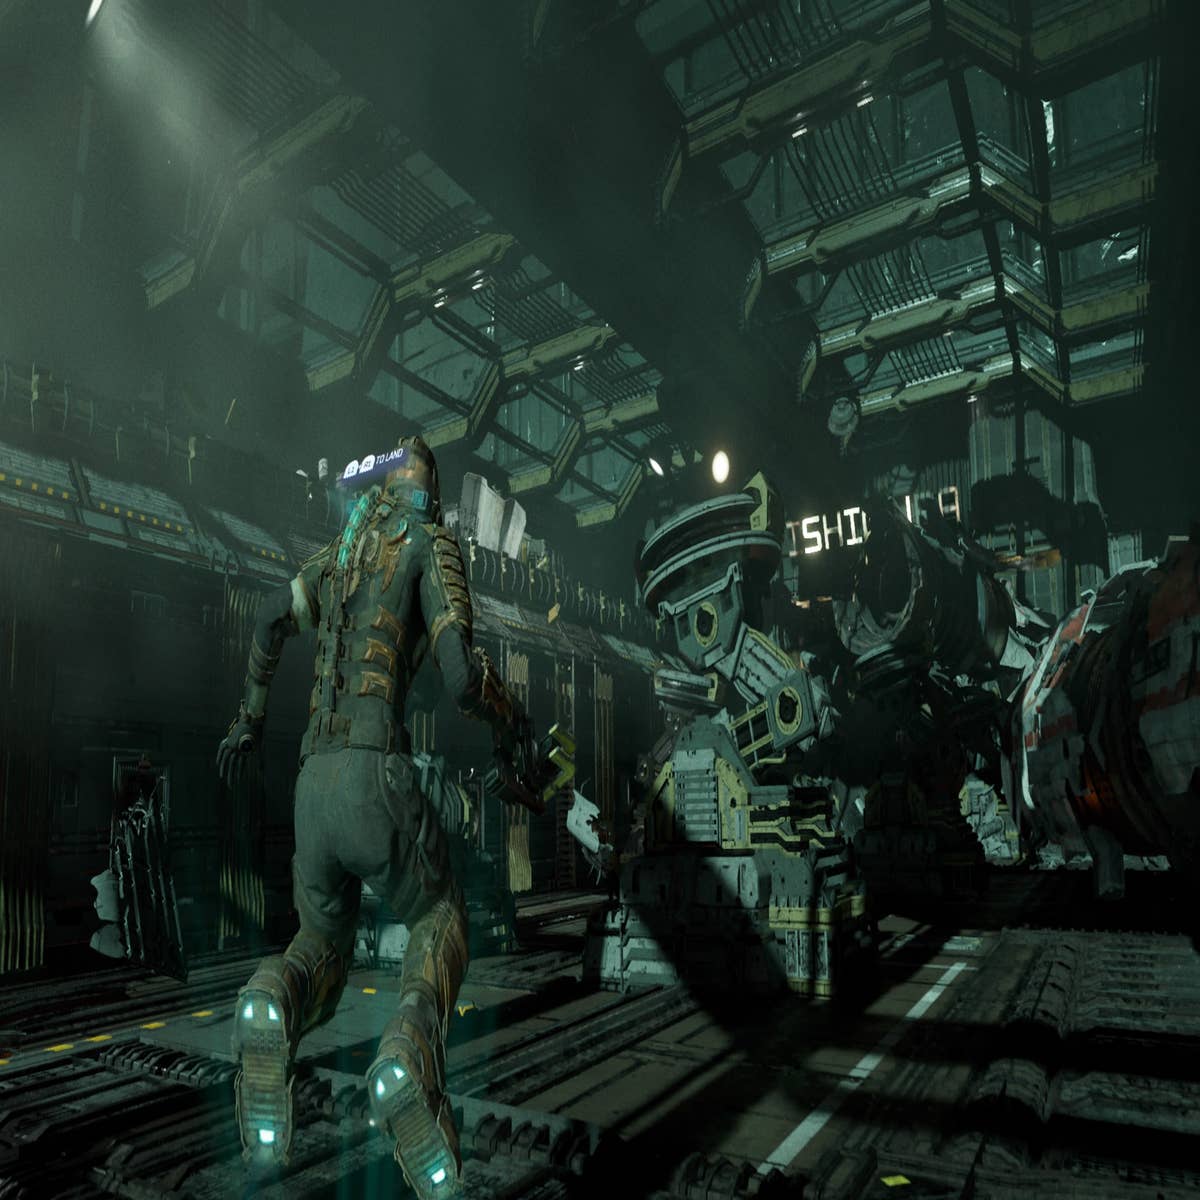 Dead Space Remake Player Points Out Hidden Reference to Dead Space 3